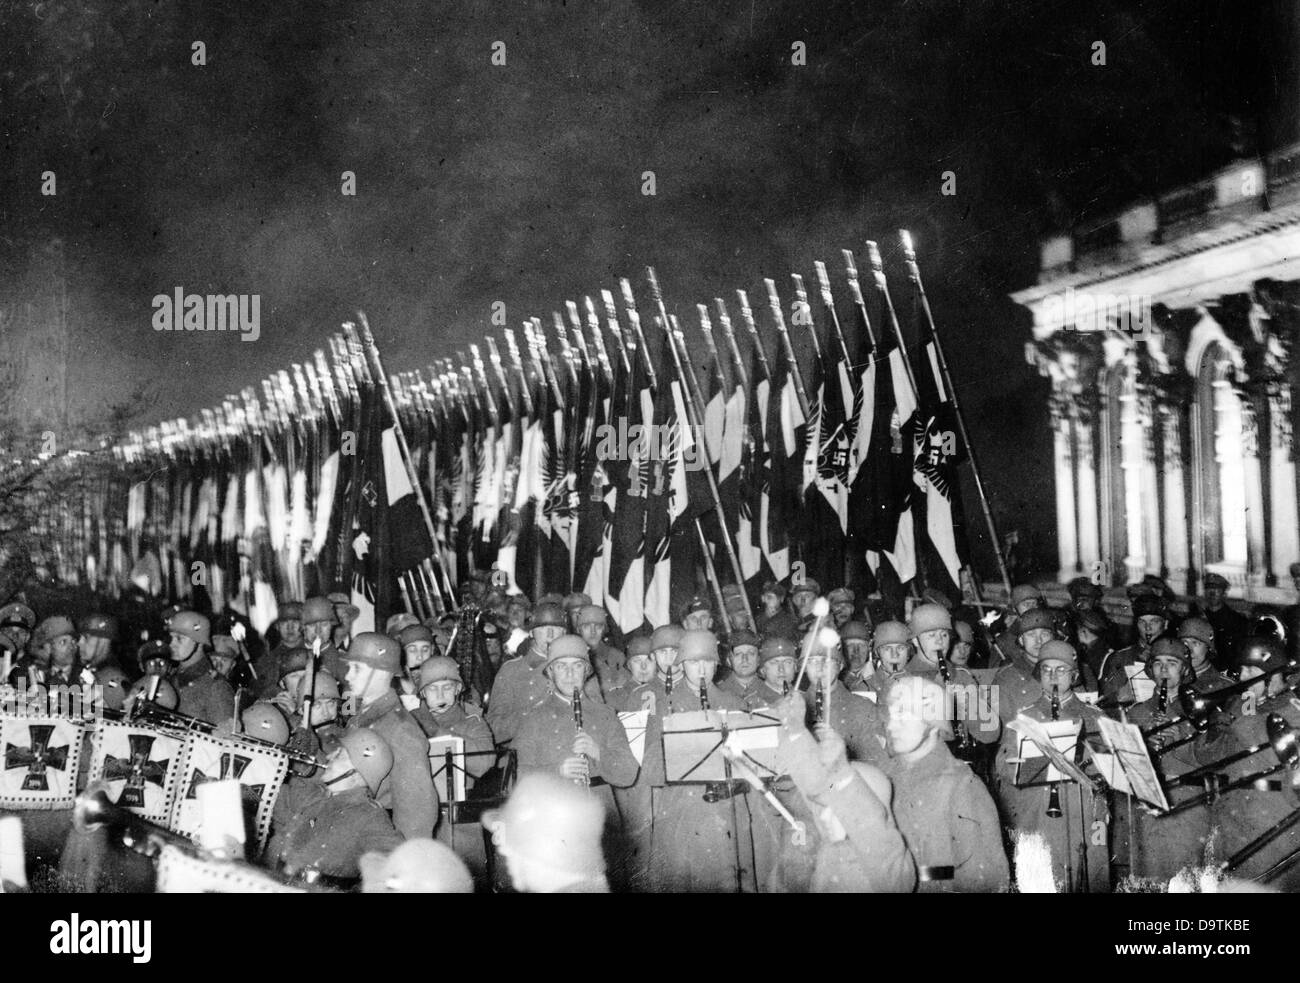 Ceremonial consecration of the flag of the Hitler Youth on 24 January 1934 at Sanssouci palace in Potsdam. Fotoarchiv für Zeitgeschichte Stock Photo